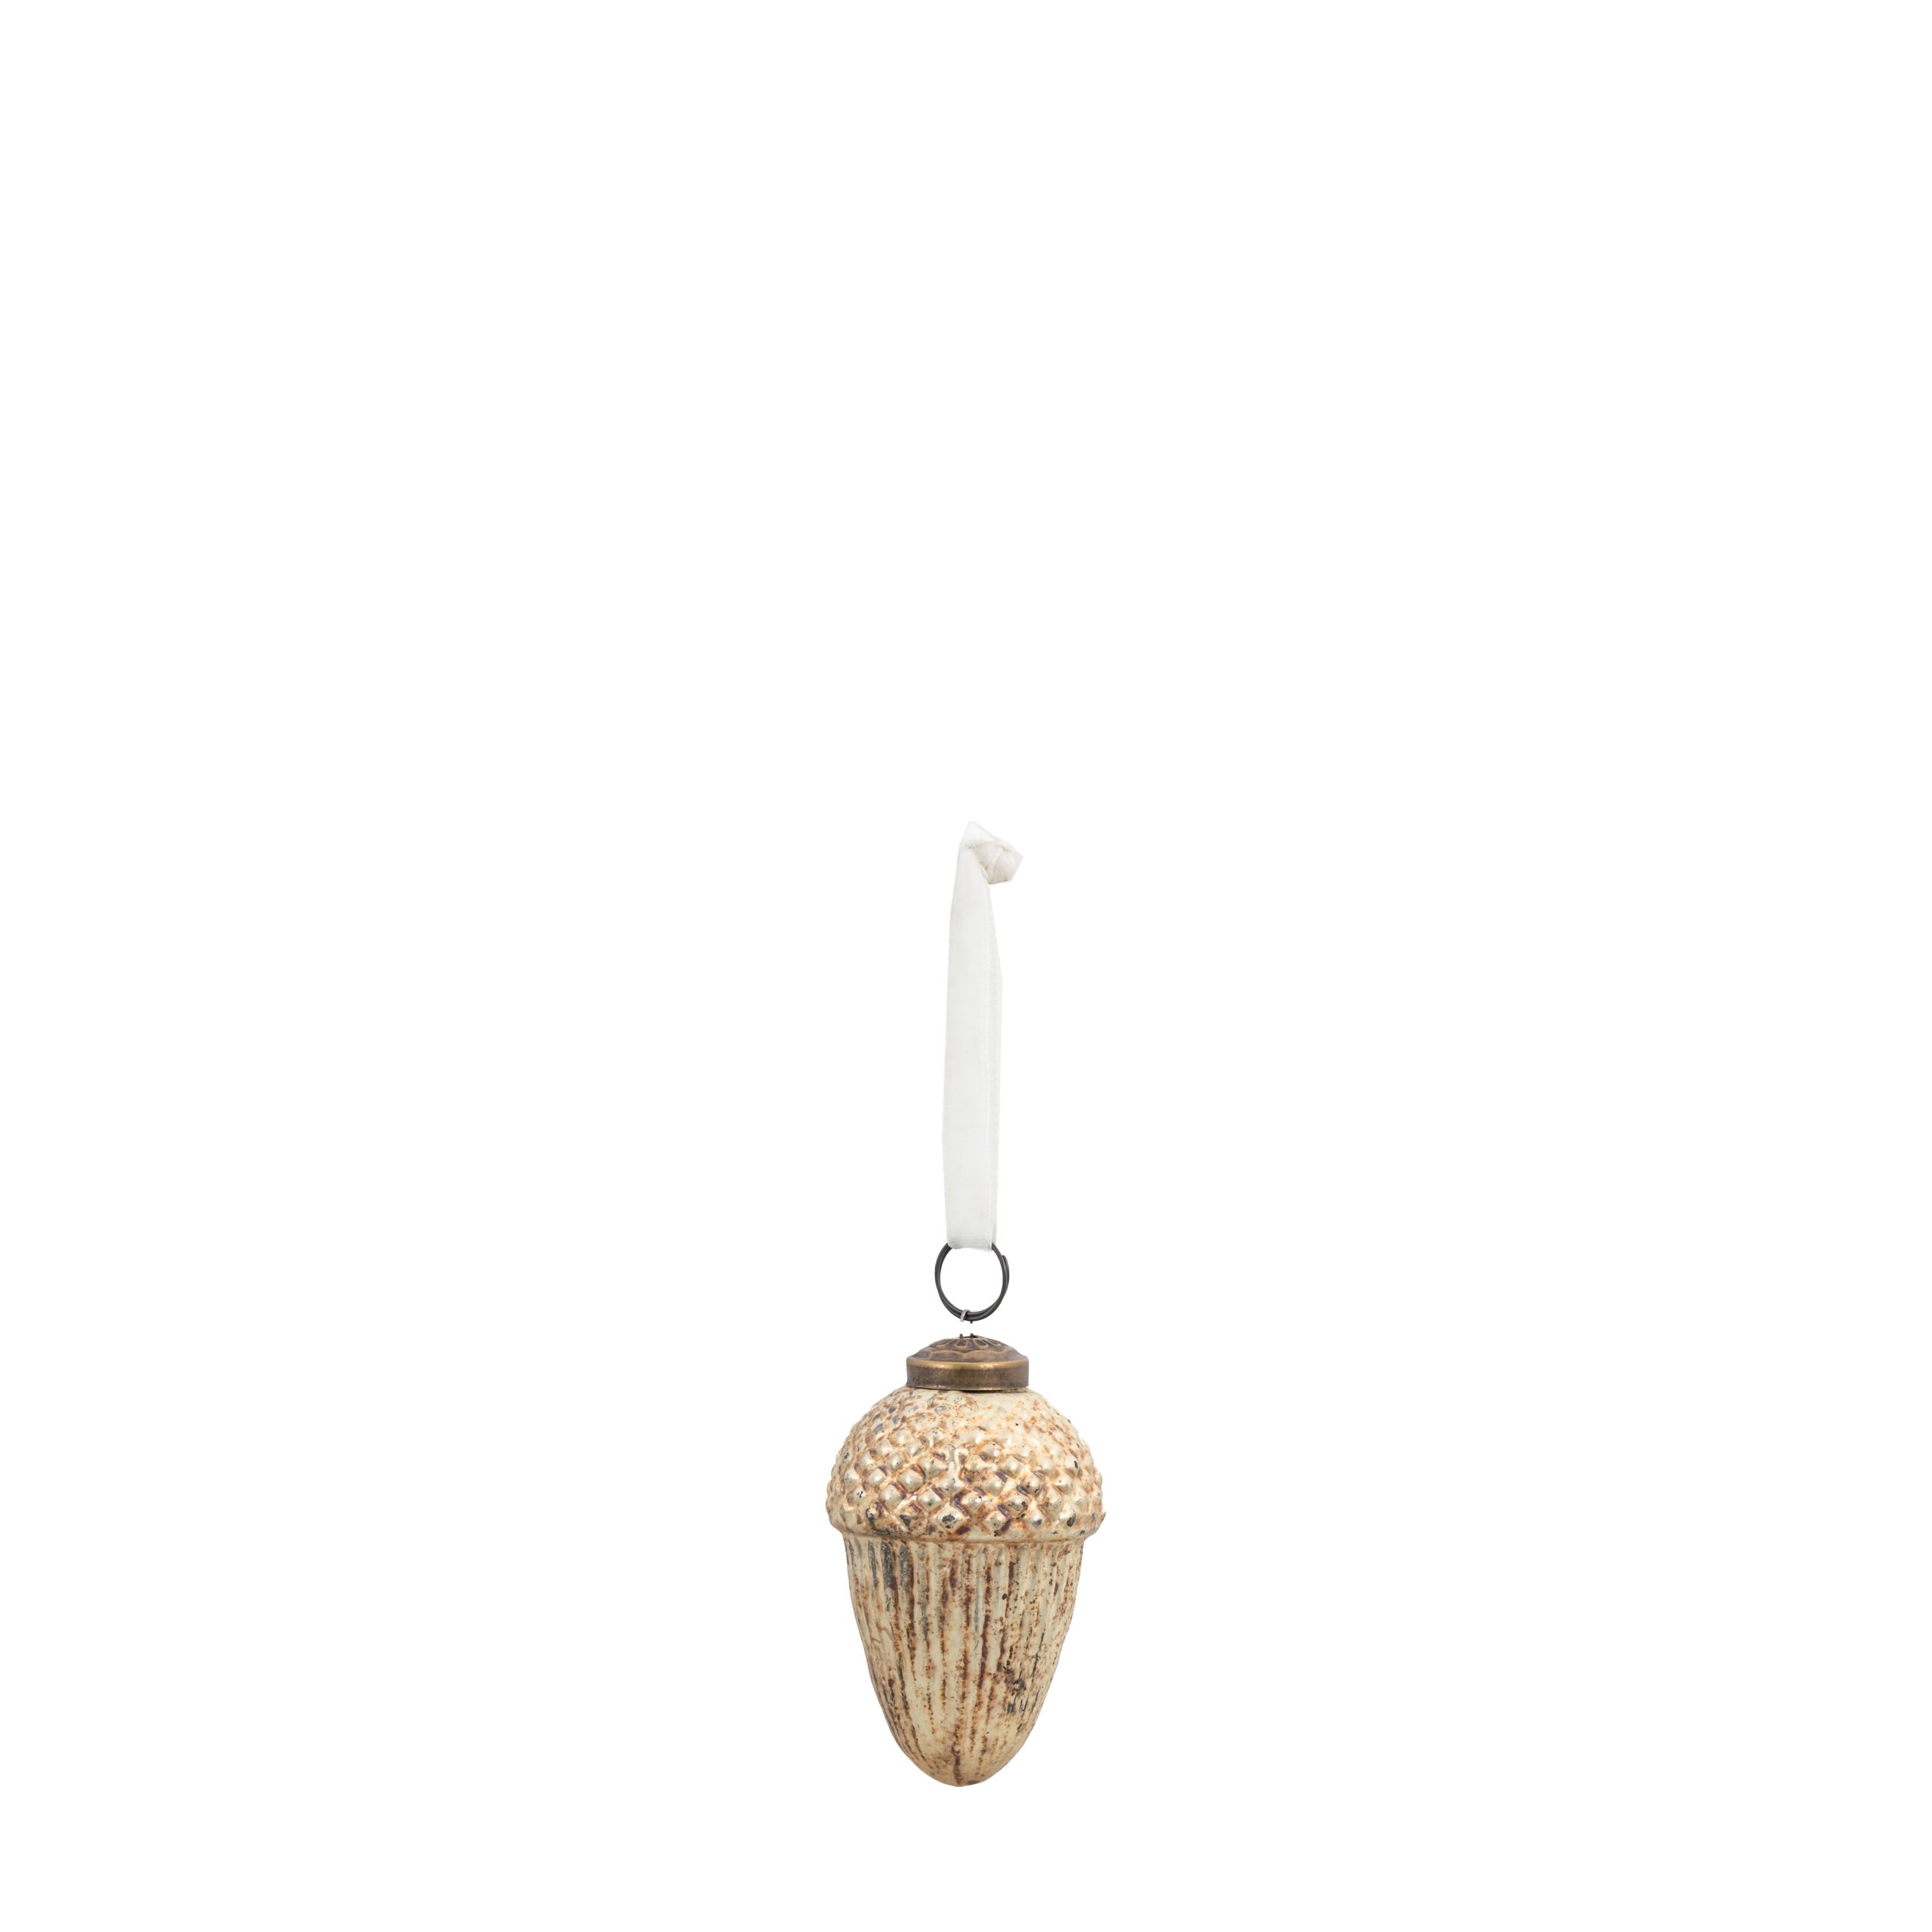 Gallery Direct Acorn Bauble Antique Gold (Set of 6)